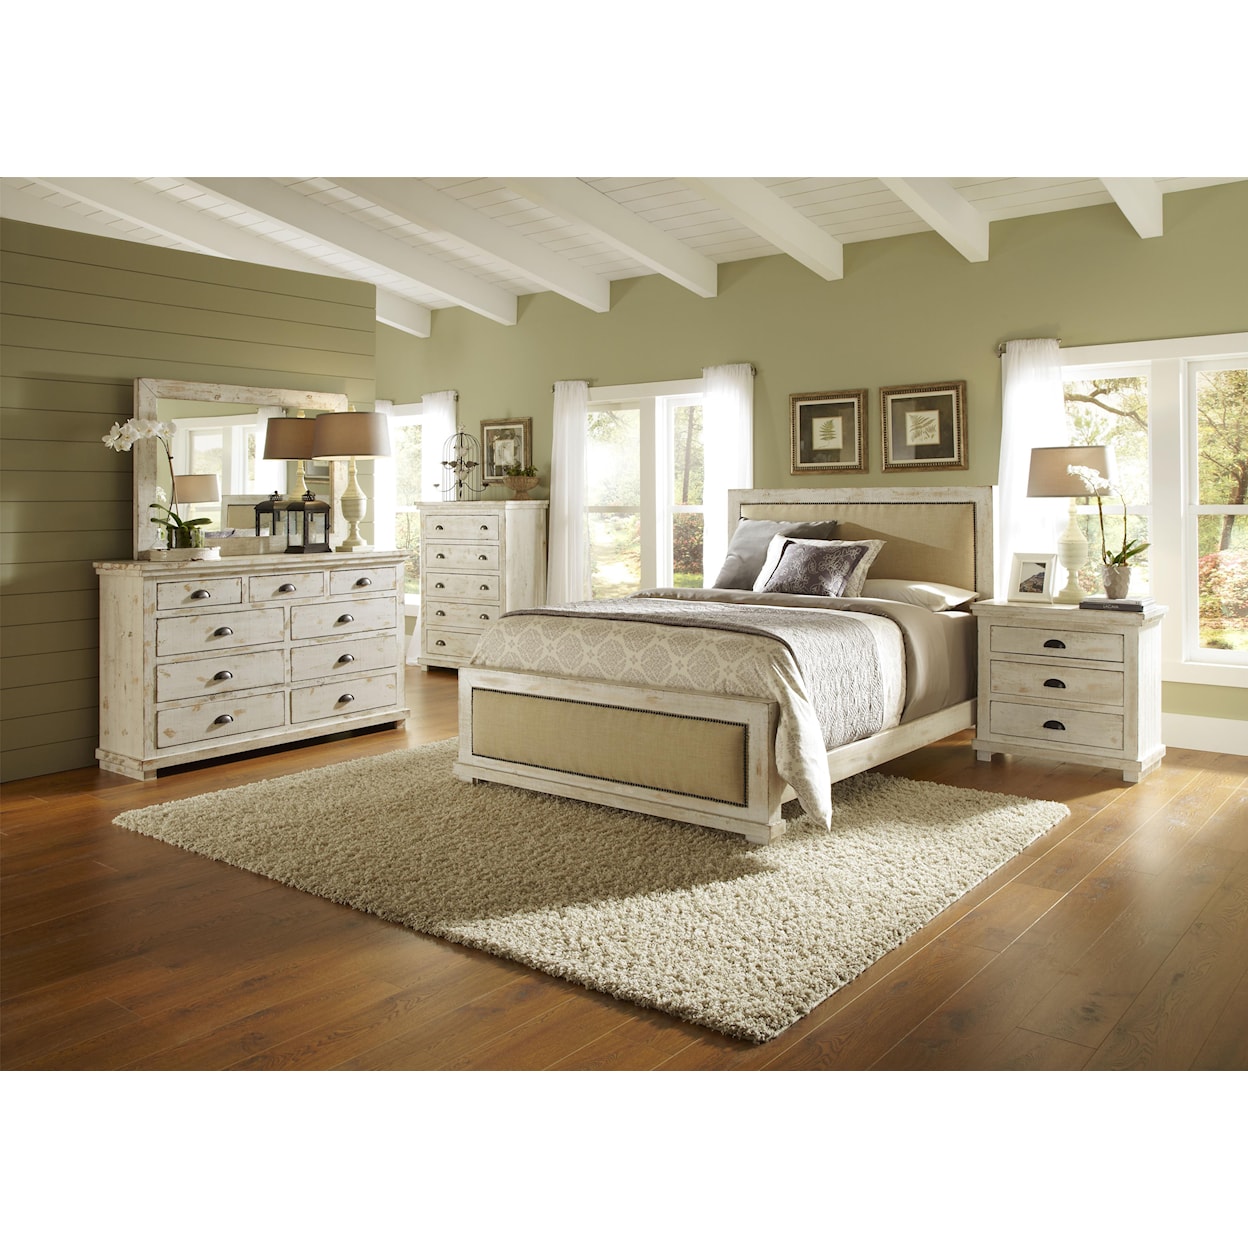 Carolina Chairs Willow Queen Bedroom Group